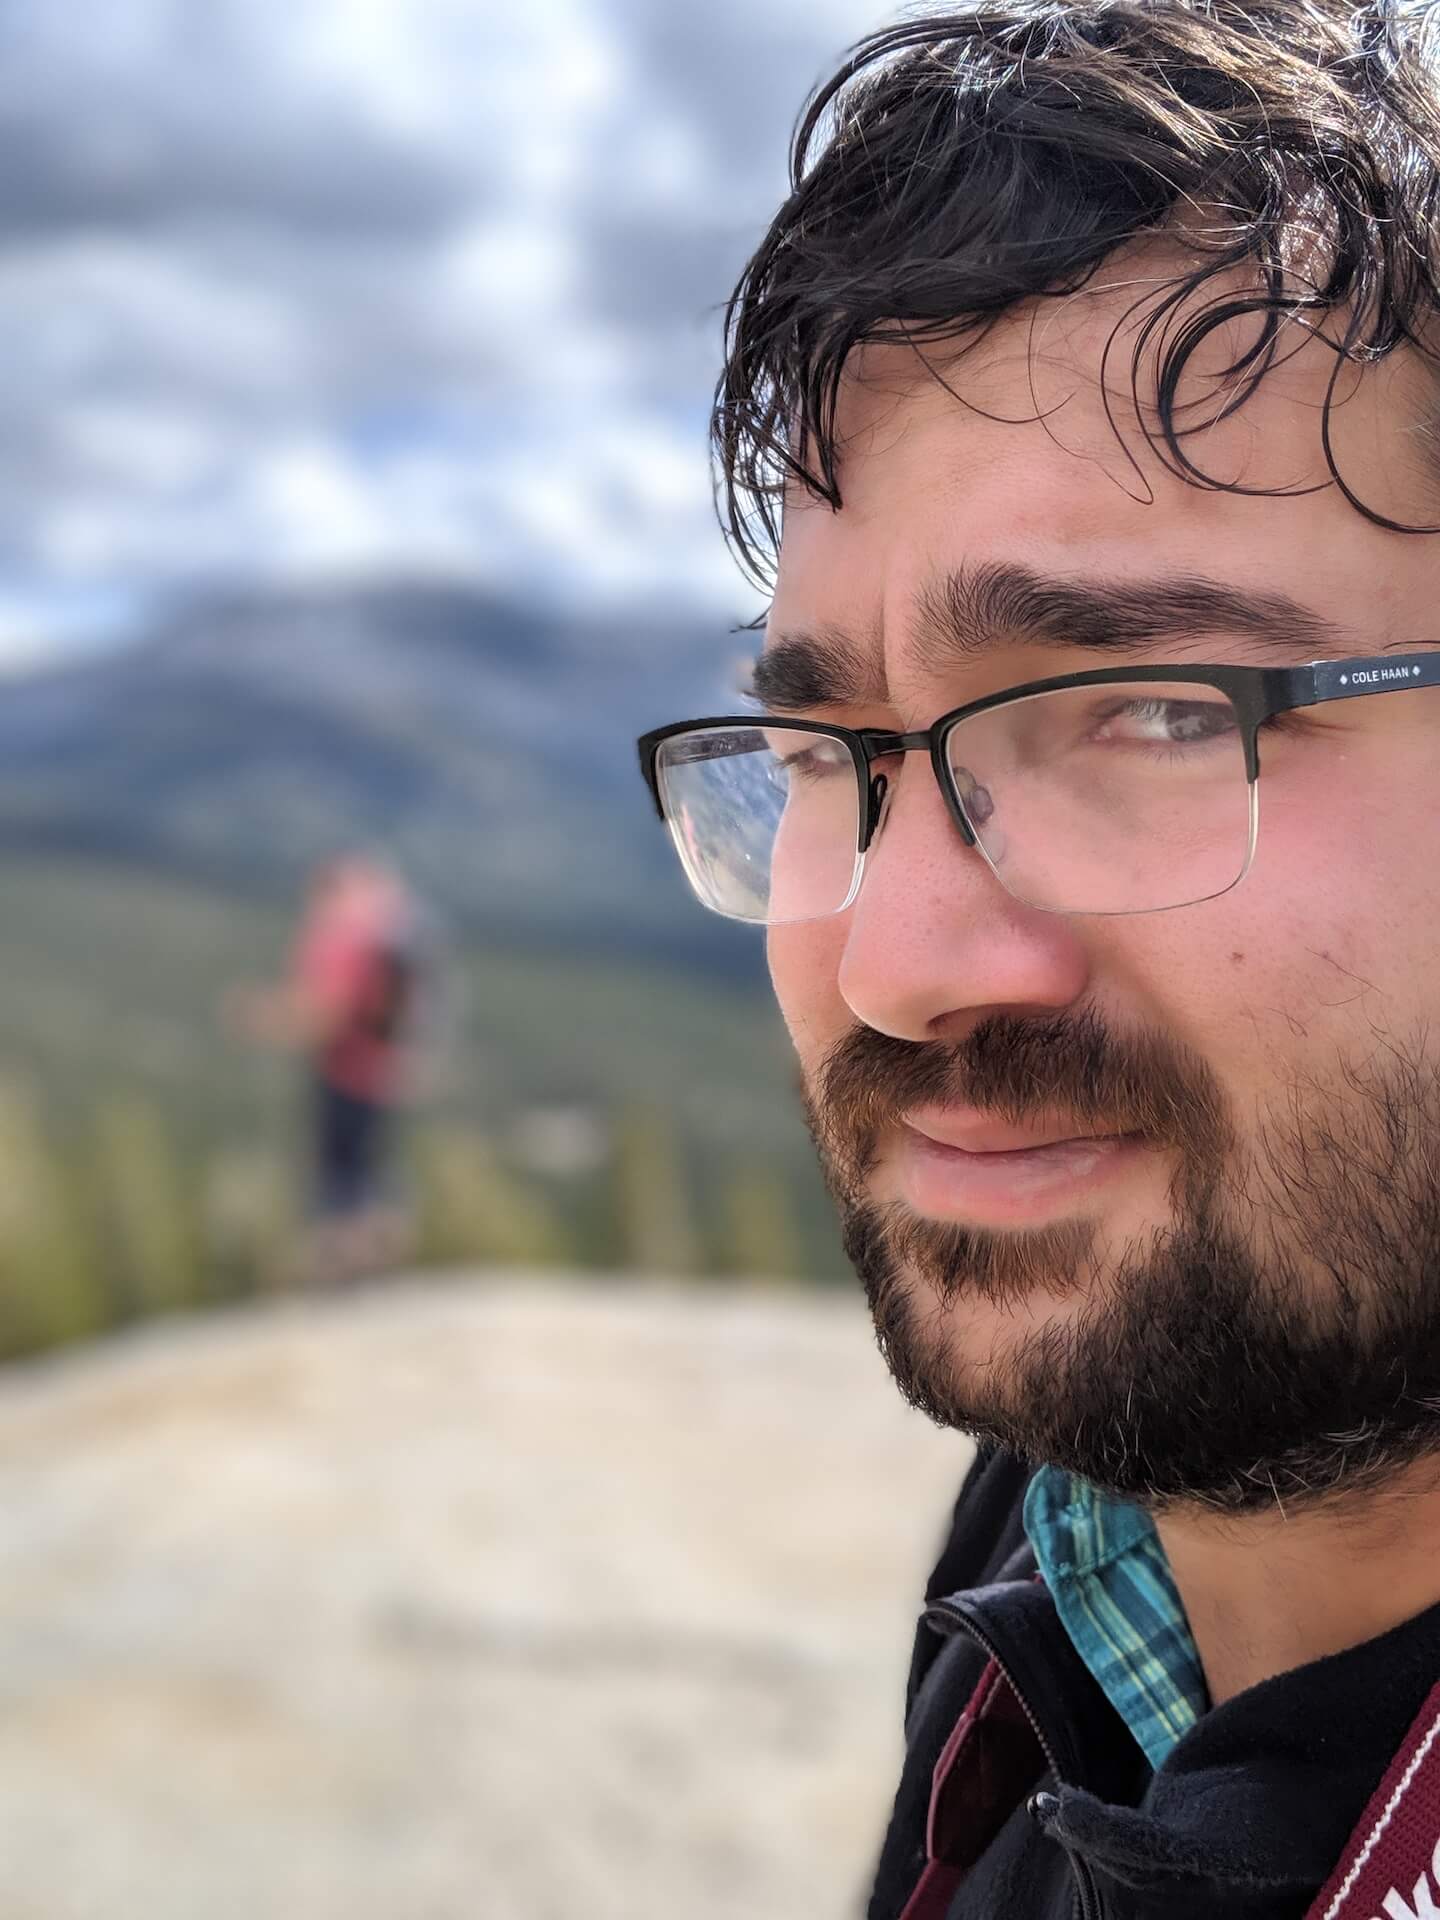 Closeup image of Tyler's face, with mountains out of focus in the background. He's very handsome